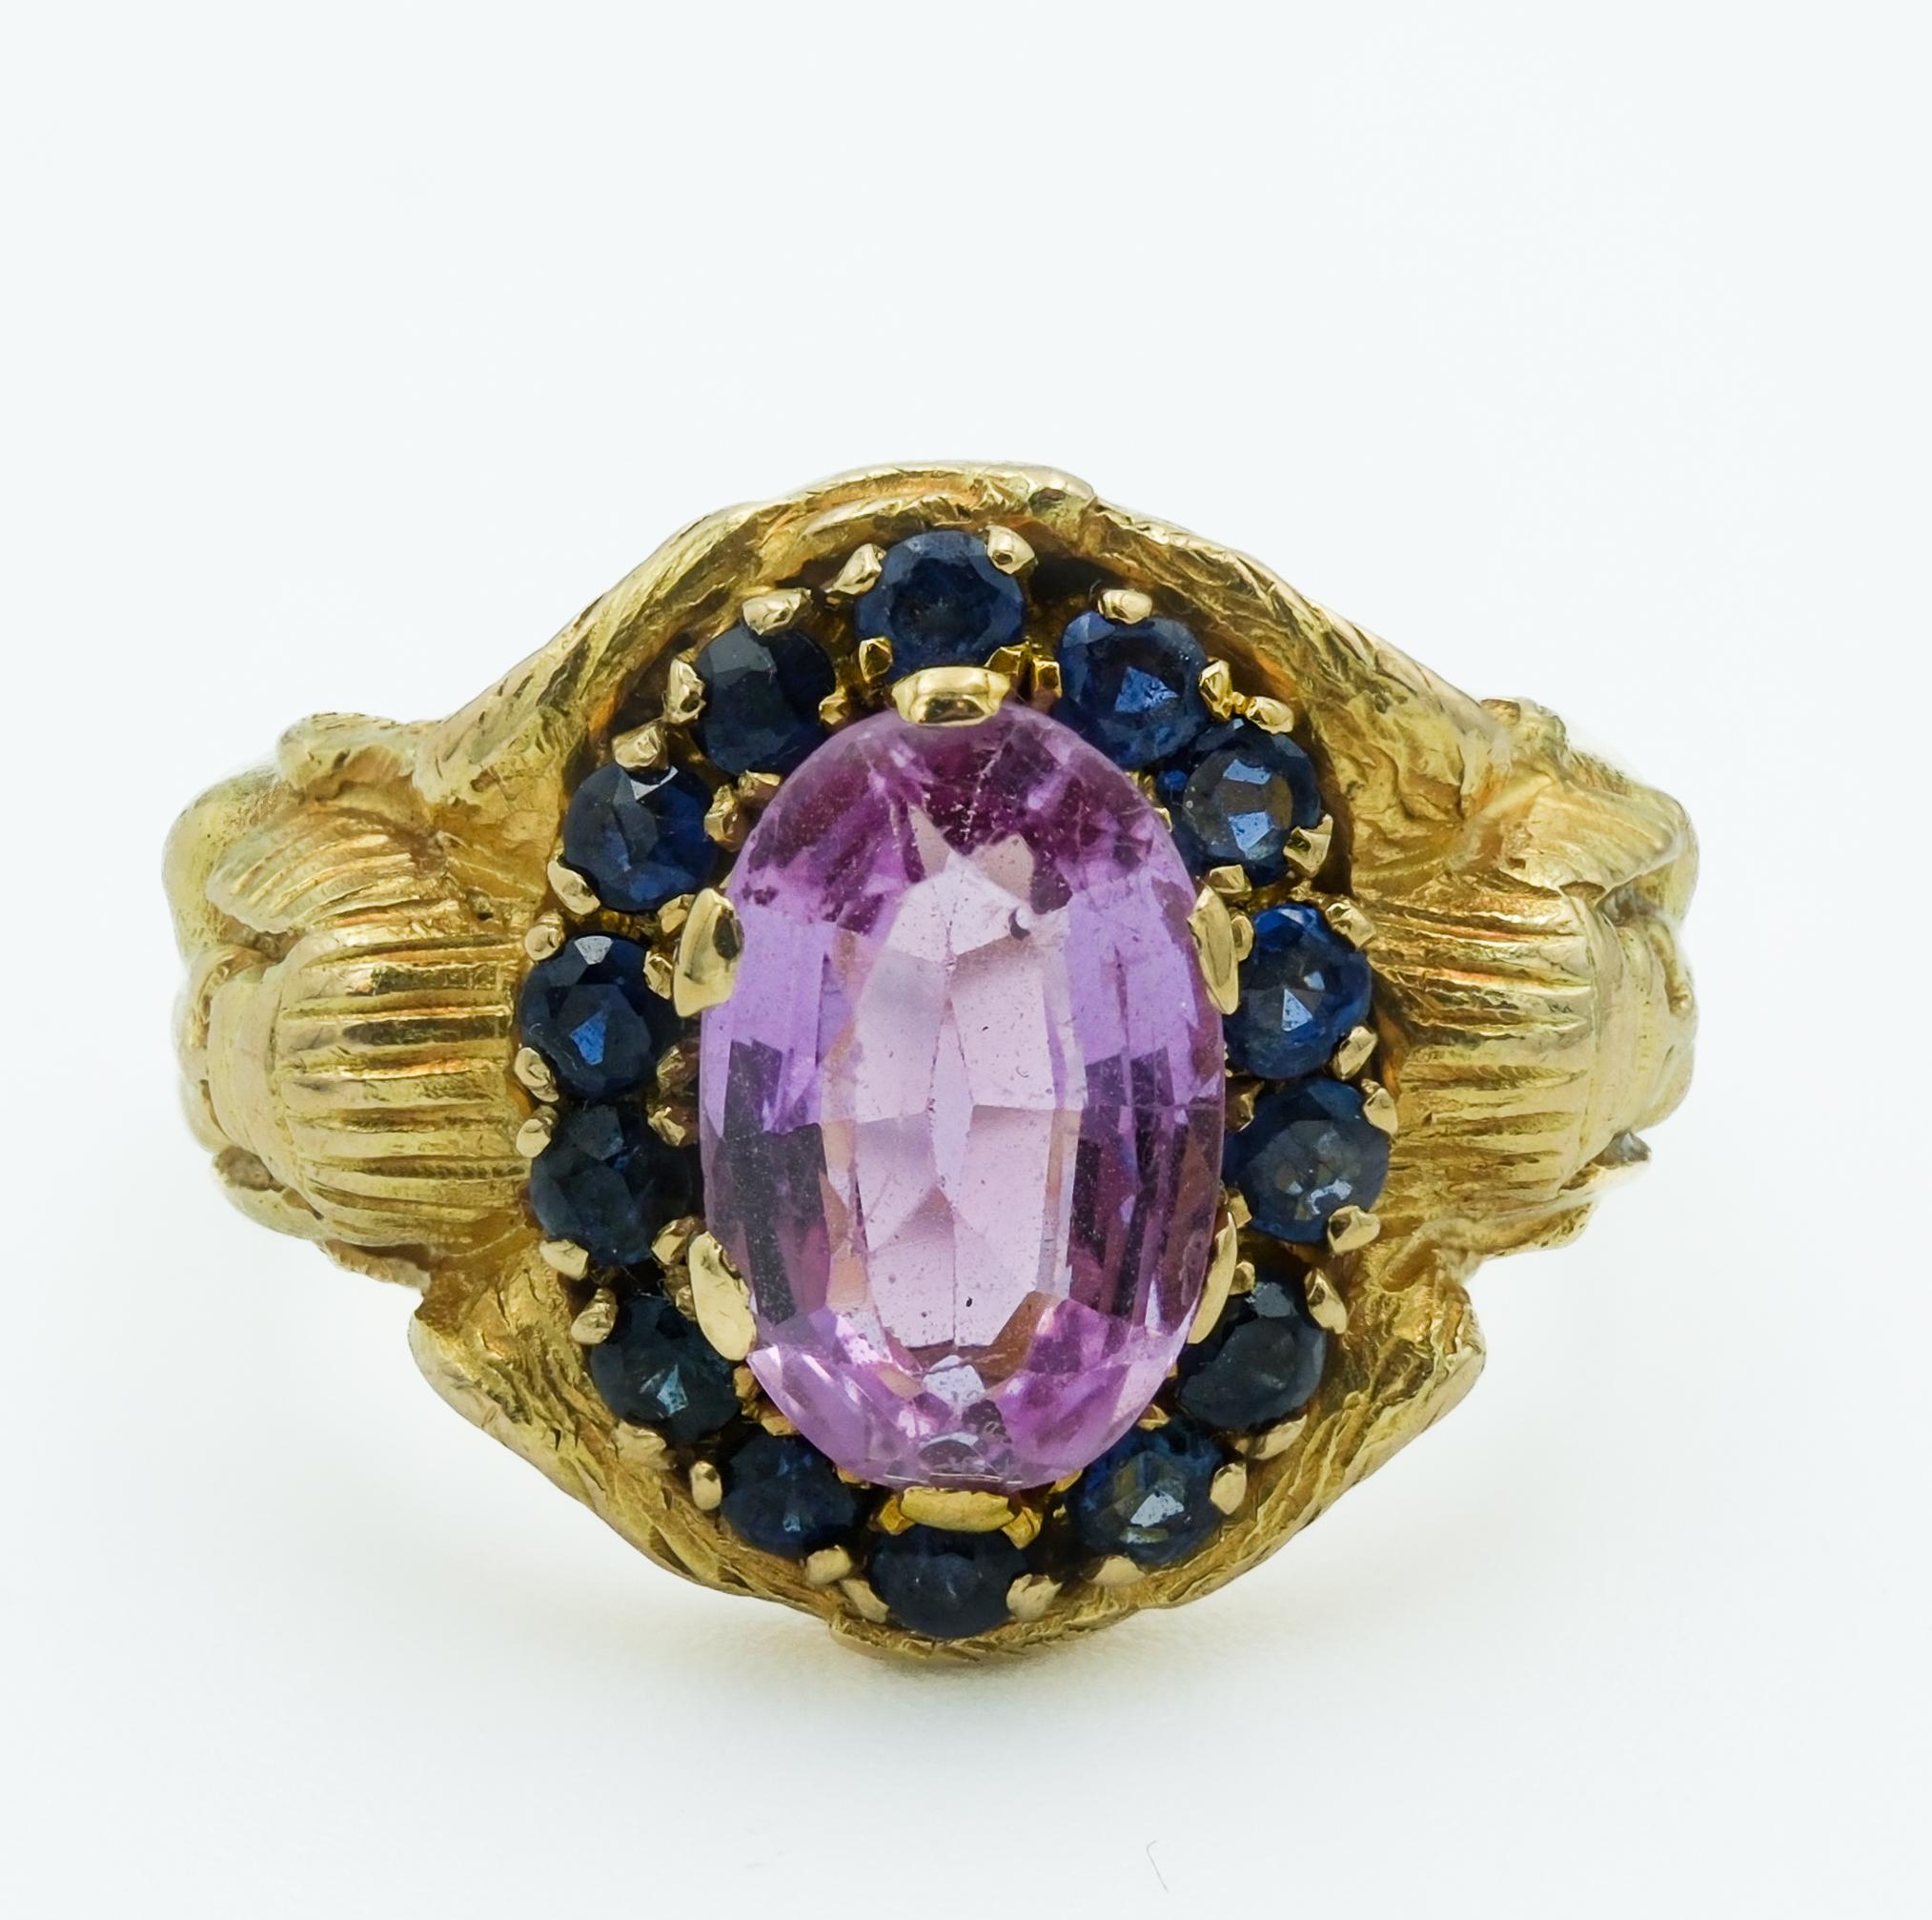 This ring is a notable representation of the Egyptian Revival jewelry, intricately crafted from 19-karat gold, a standard indicative of Portuguese artisanship. The ring features with a sizable 2.8-carat pink topaz, faceted cut to maximize its